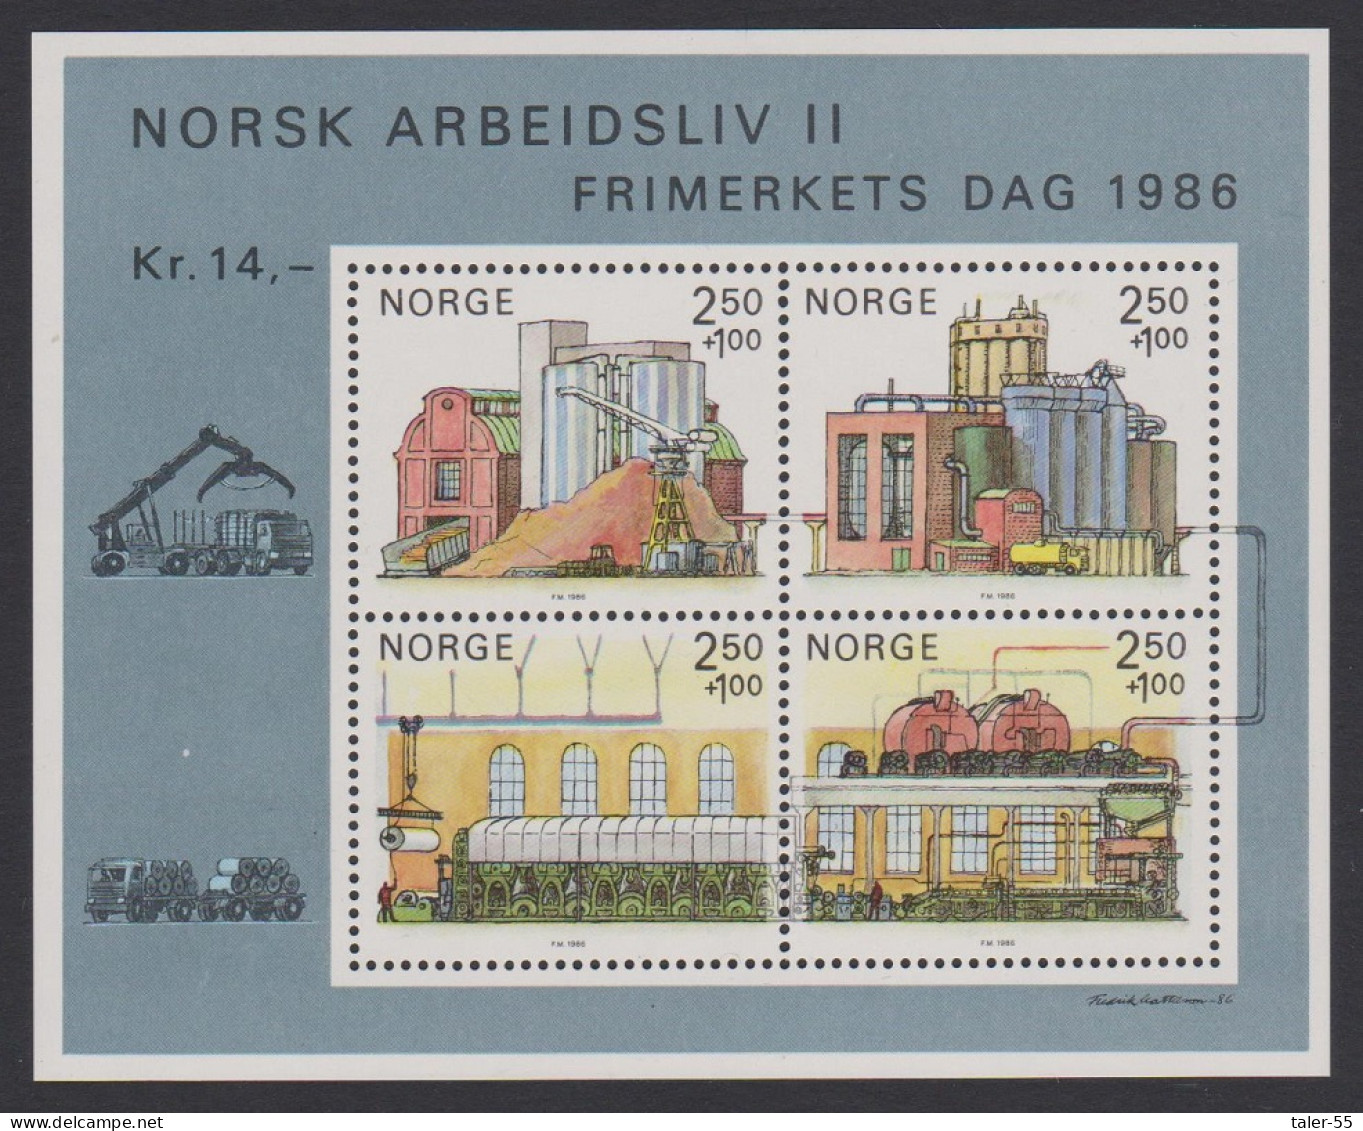 Norway Norwegian Working Life Paper Industry MS 1986 MNH SG#MS989 - Nuovi